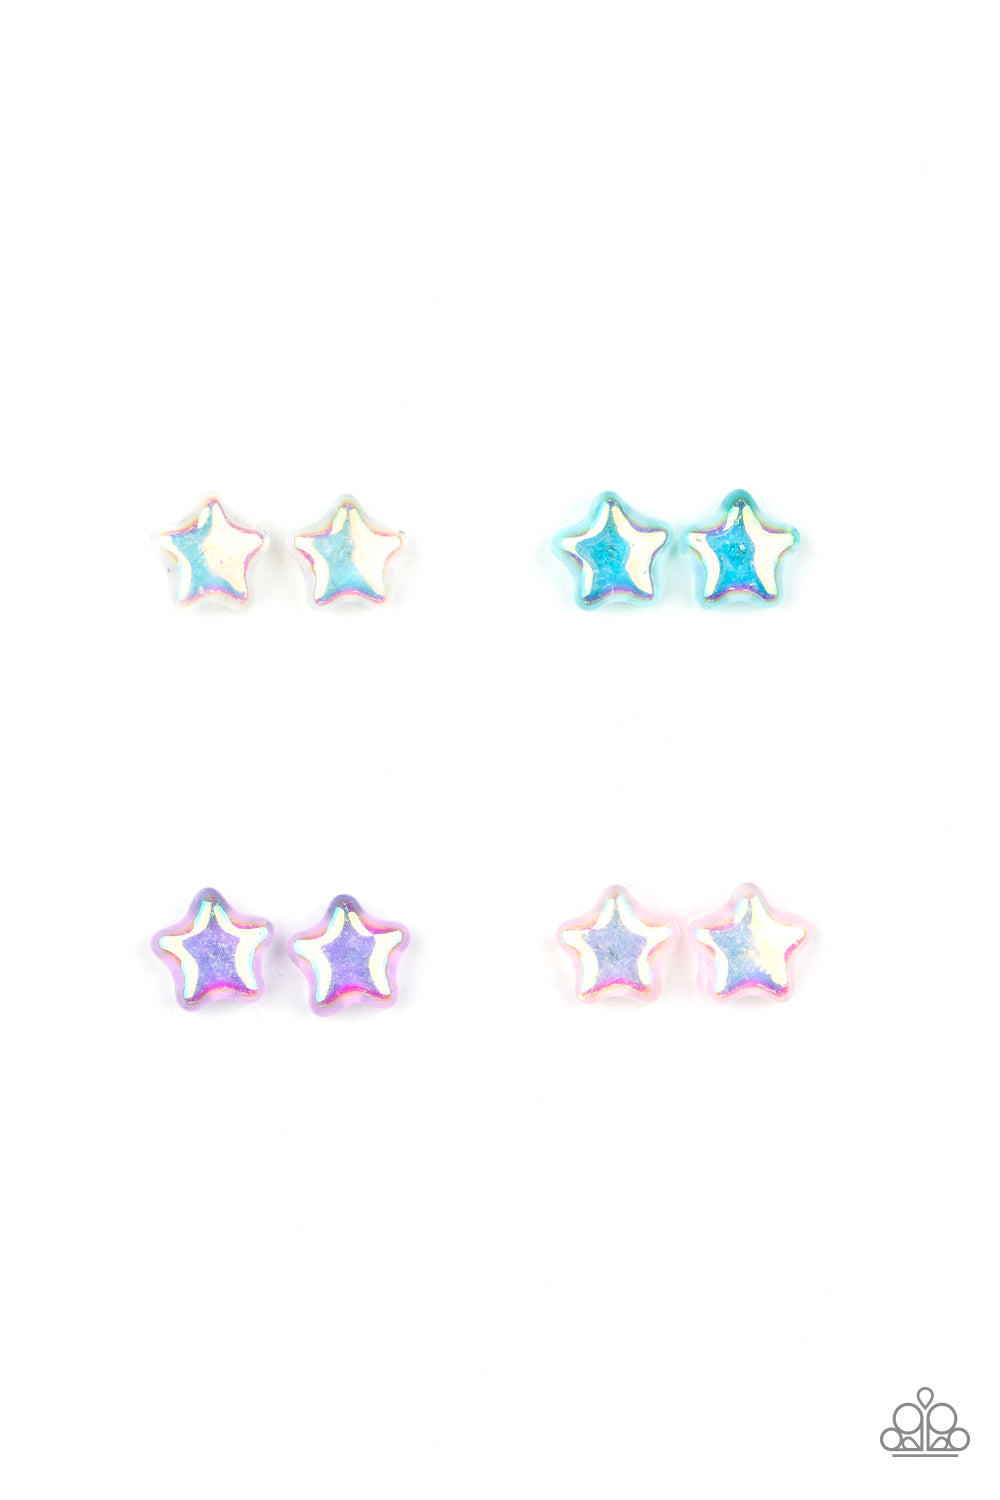 1 pack of 6 Lil Precious Iridescent Star Earrings